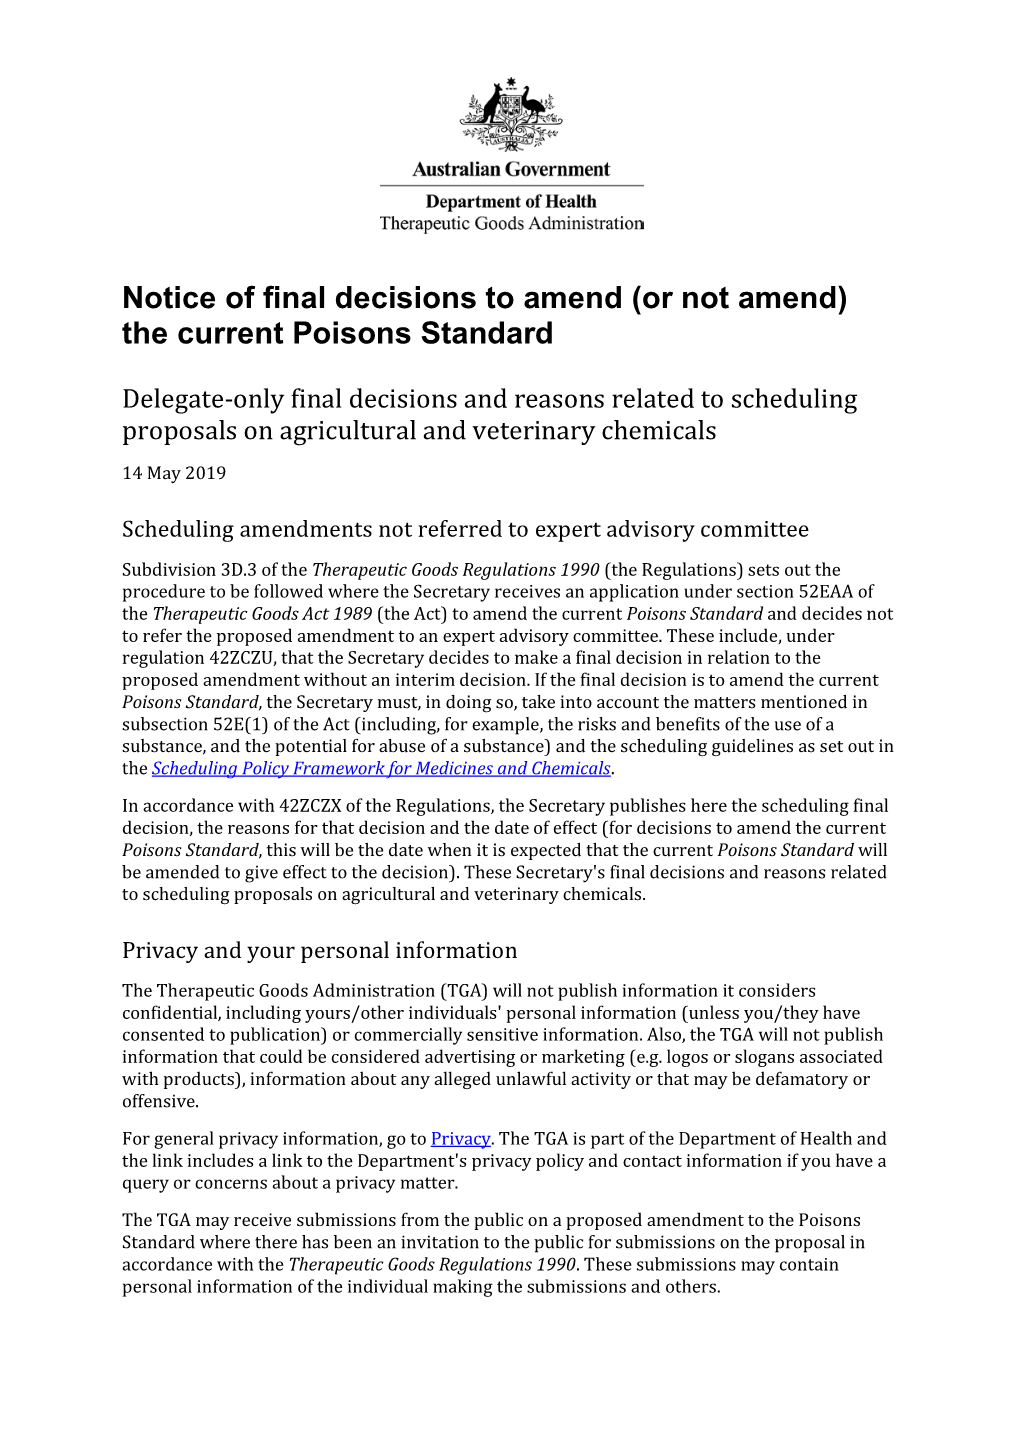 Delegate-Only Final Decisions and Reasons: Agricultural and Veterinary Chemicals